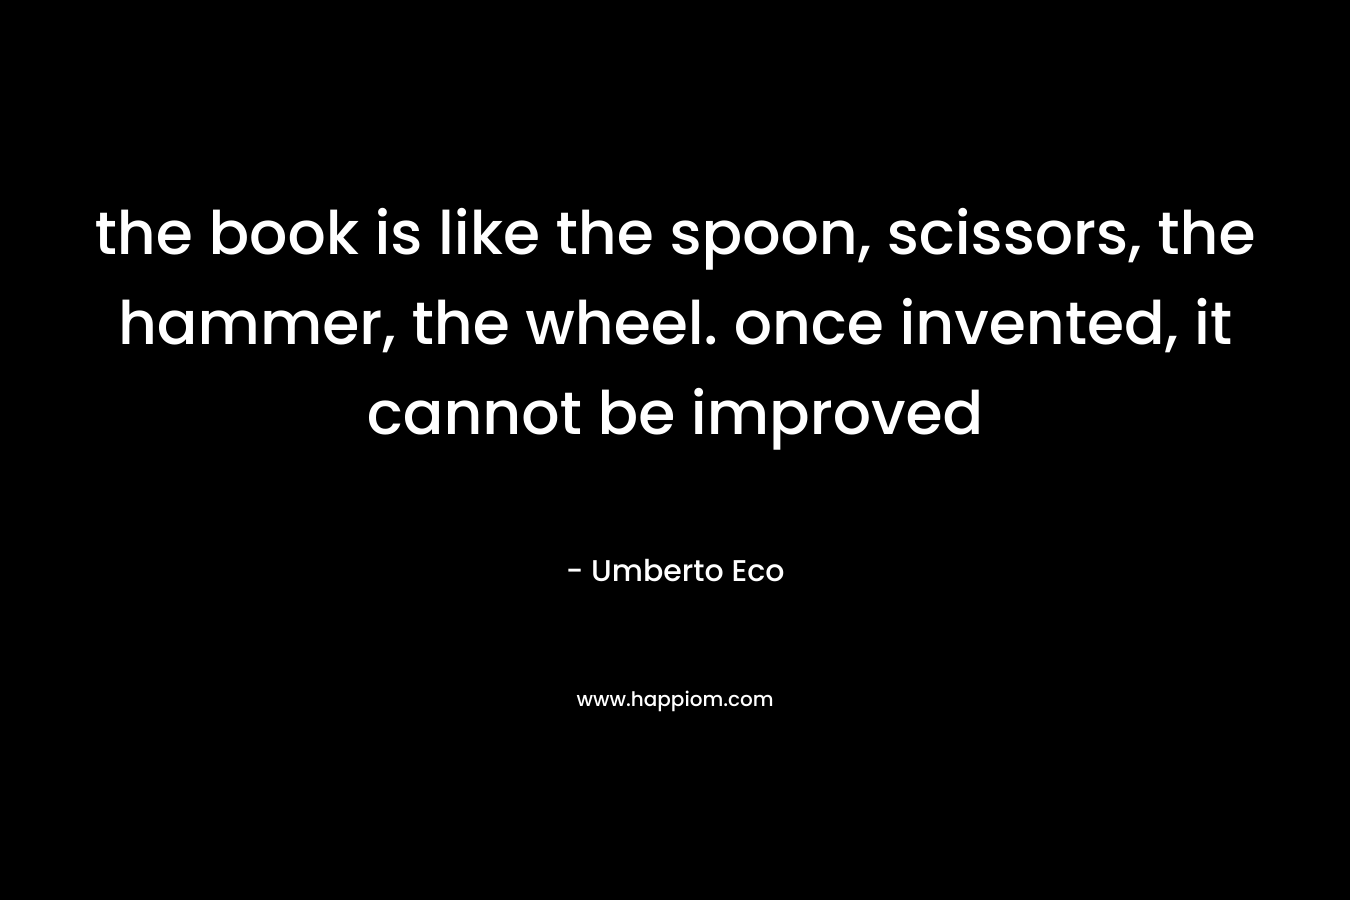 the book is like the spoon, scissors, the hammer, the wheel. once invented, it cannot be improved – Umberto Eco